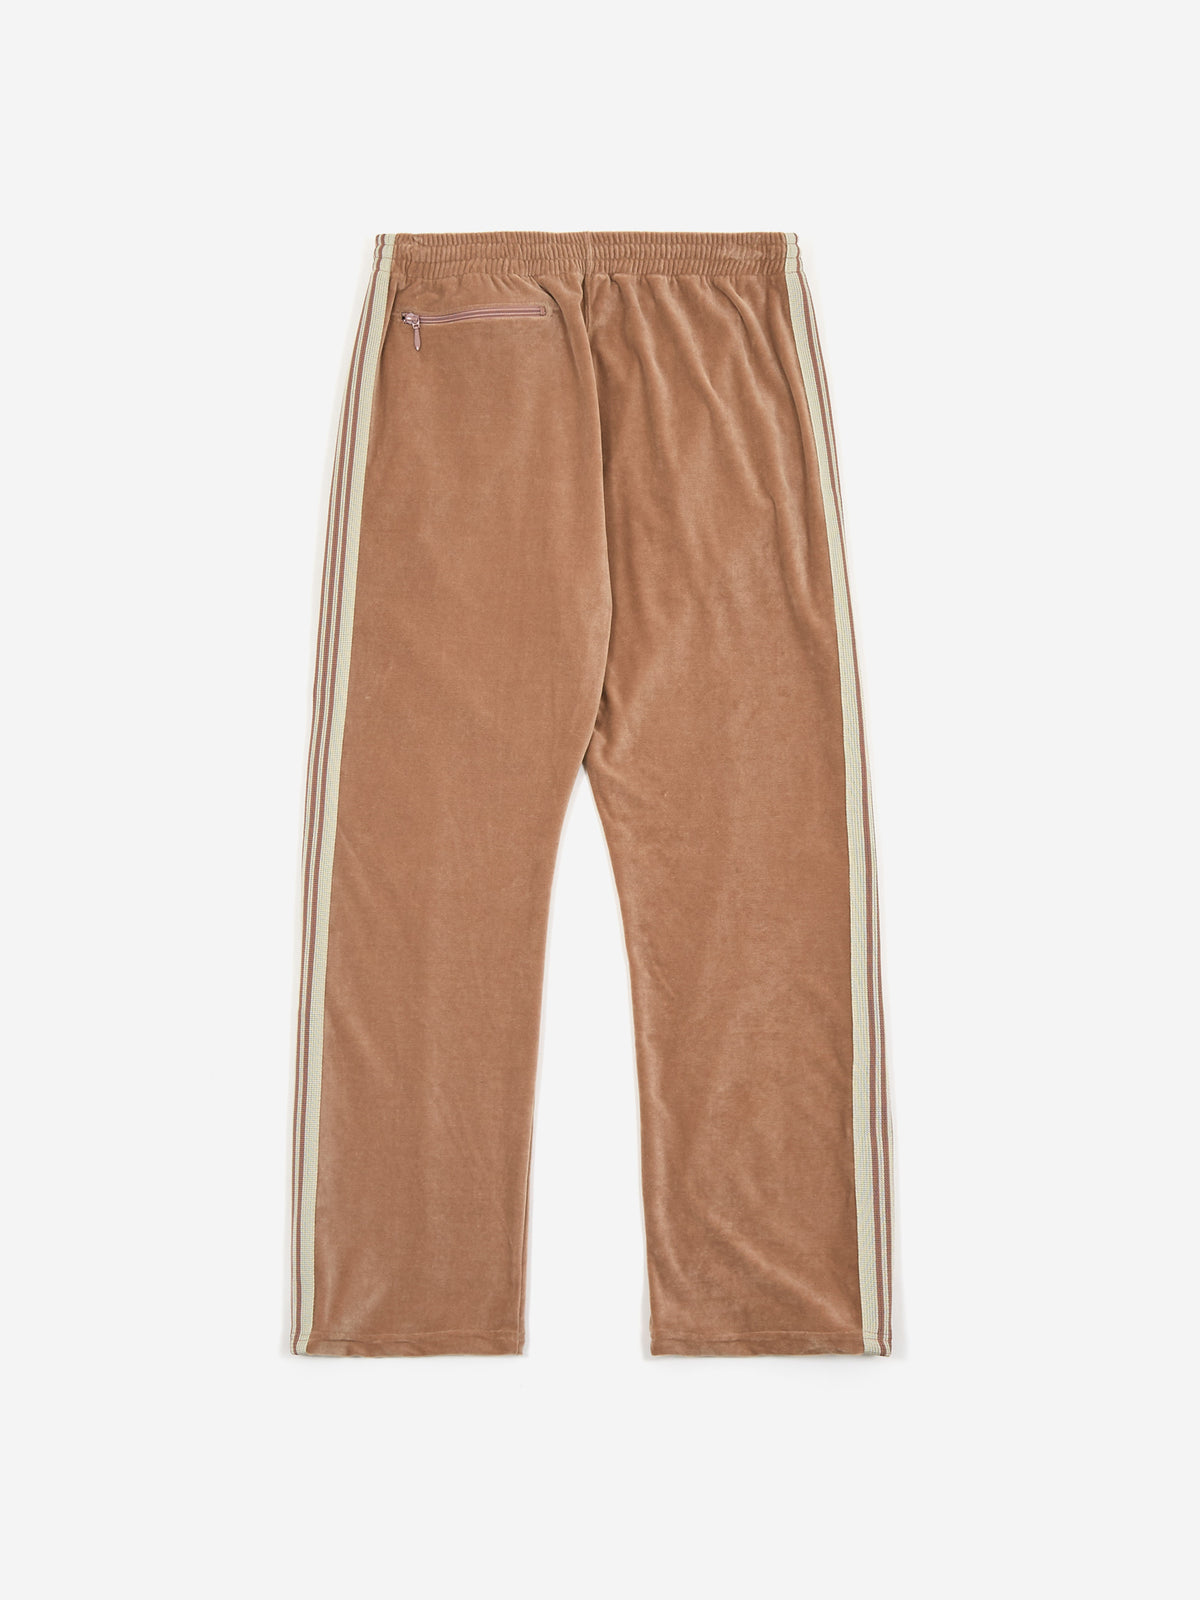 Find the Latest Needles Narrow Track Pant - C/PE Velour - Old Rose